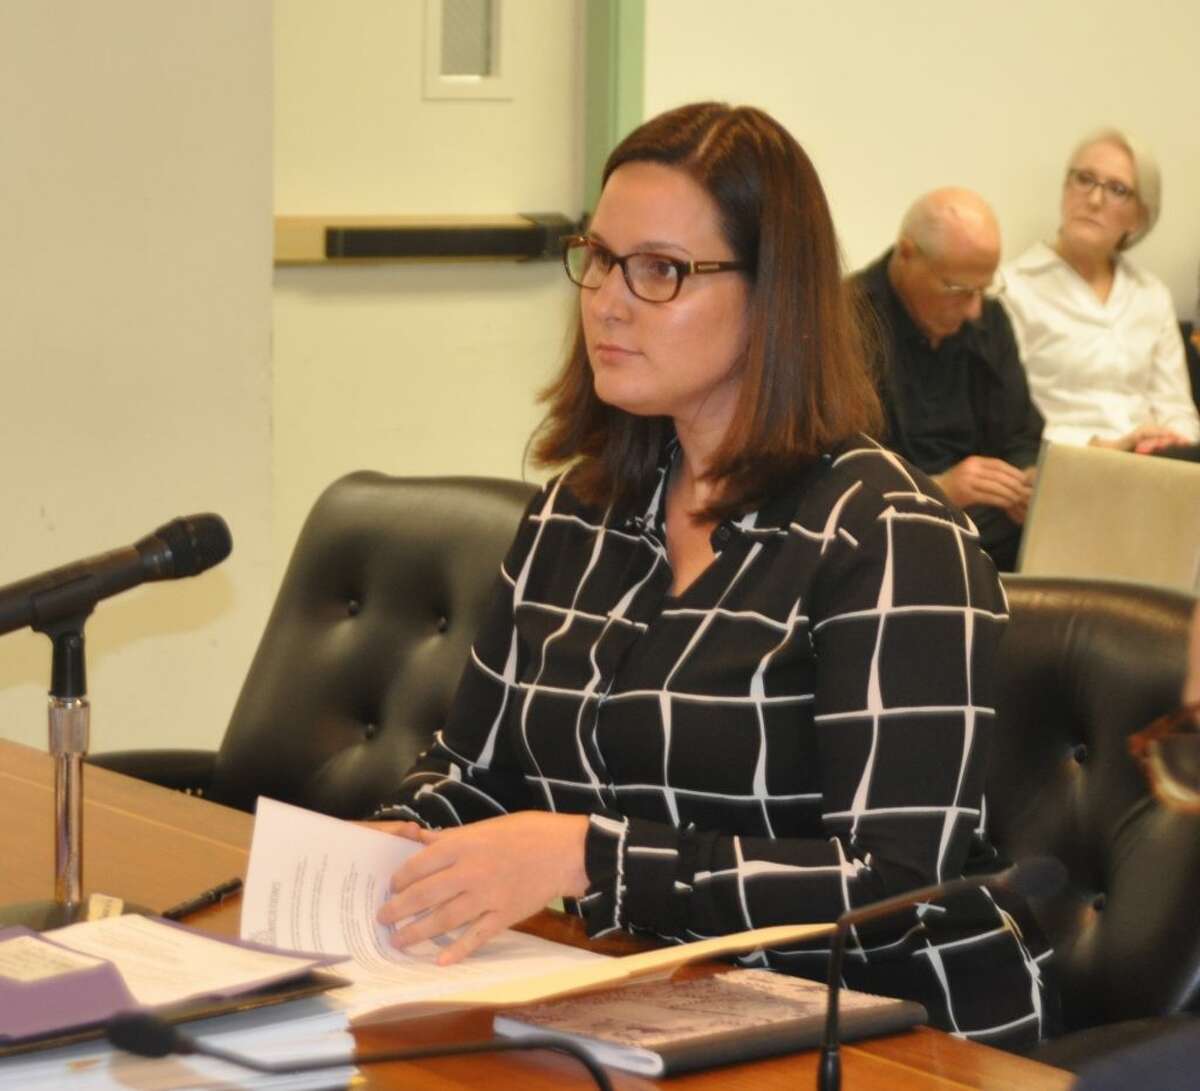 Emily Pambianchi of Social Graces Communications spoke to the selectmen at their Aug. 13 meeting. — Macklin Reid photo